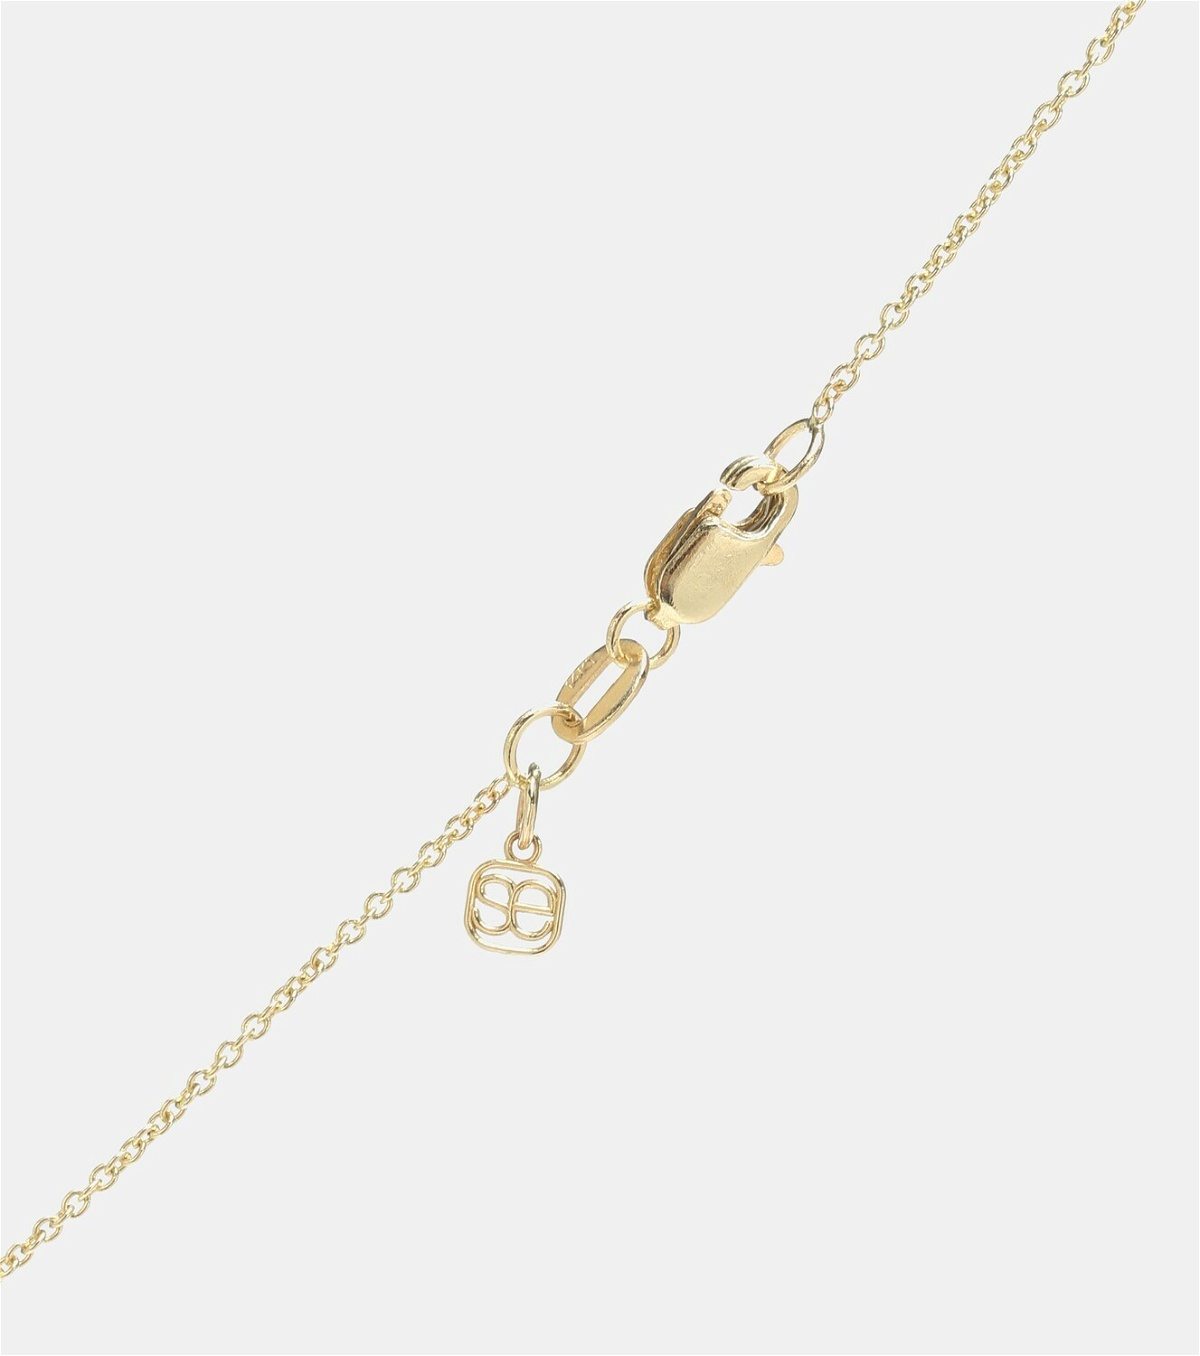 Sydney Evan Starburst Small 14kt yellow gold and diamond necklace